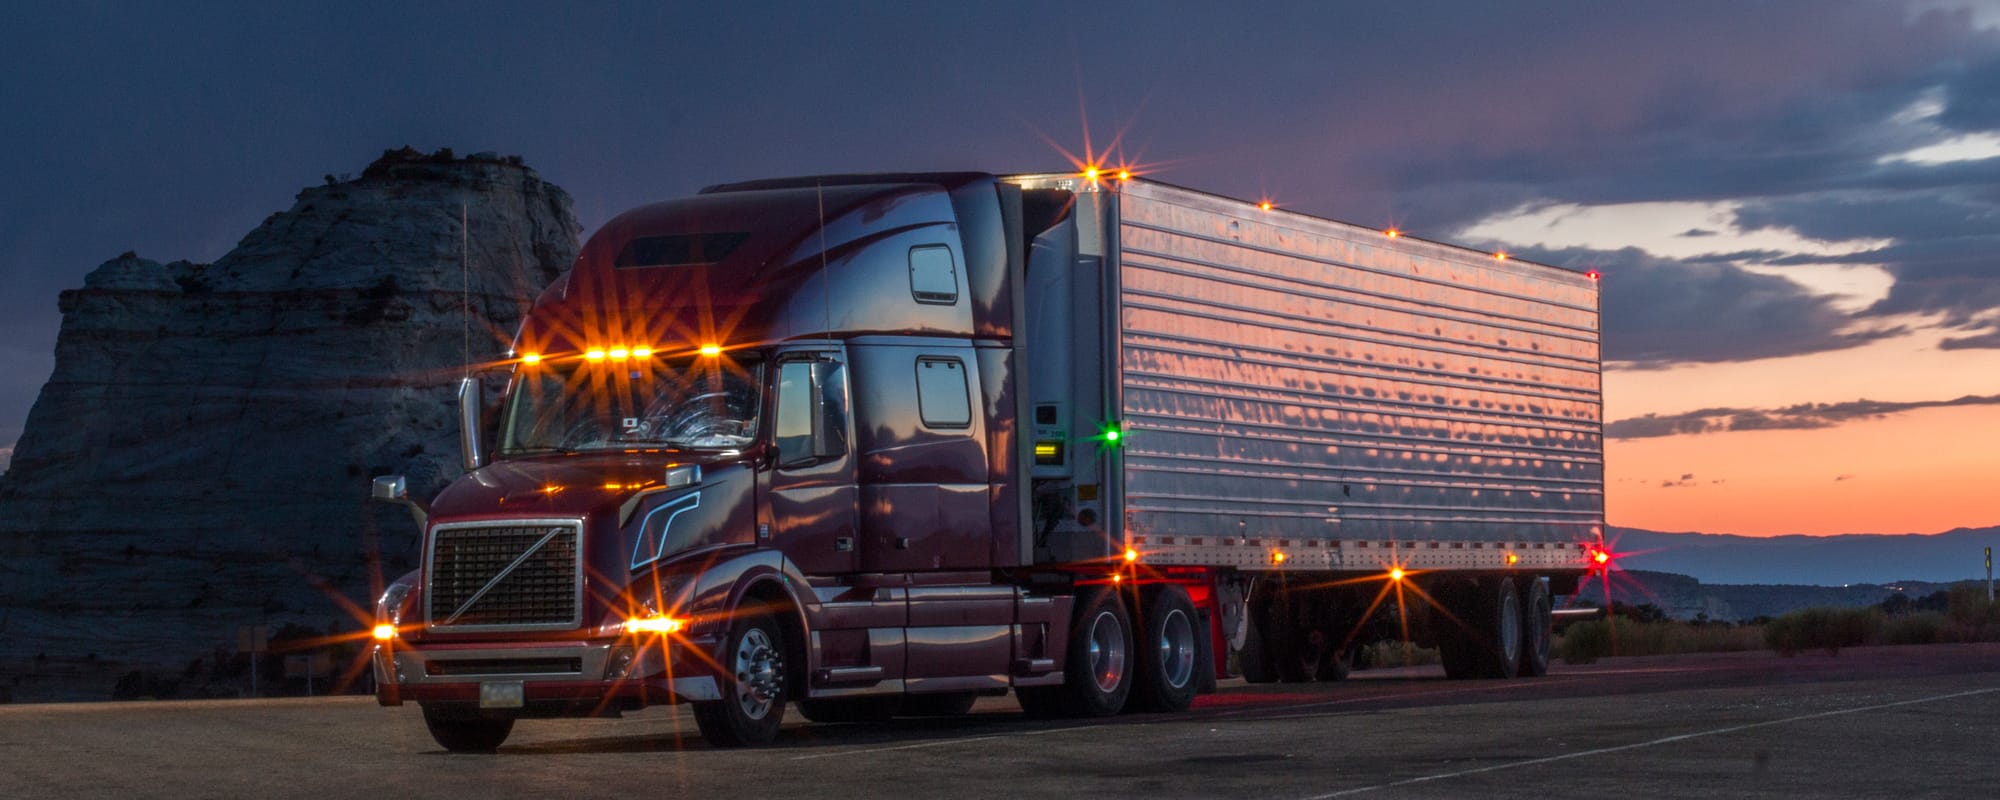 Image of tractor trailer parked with lights on